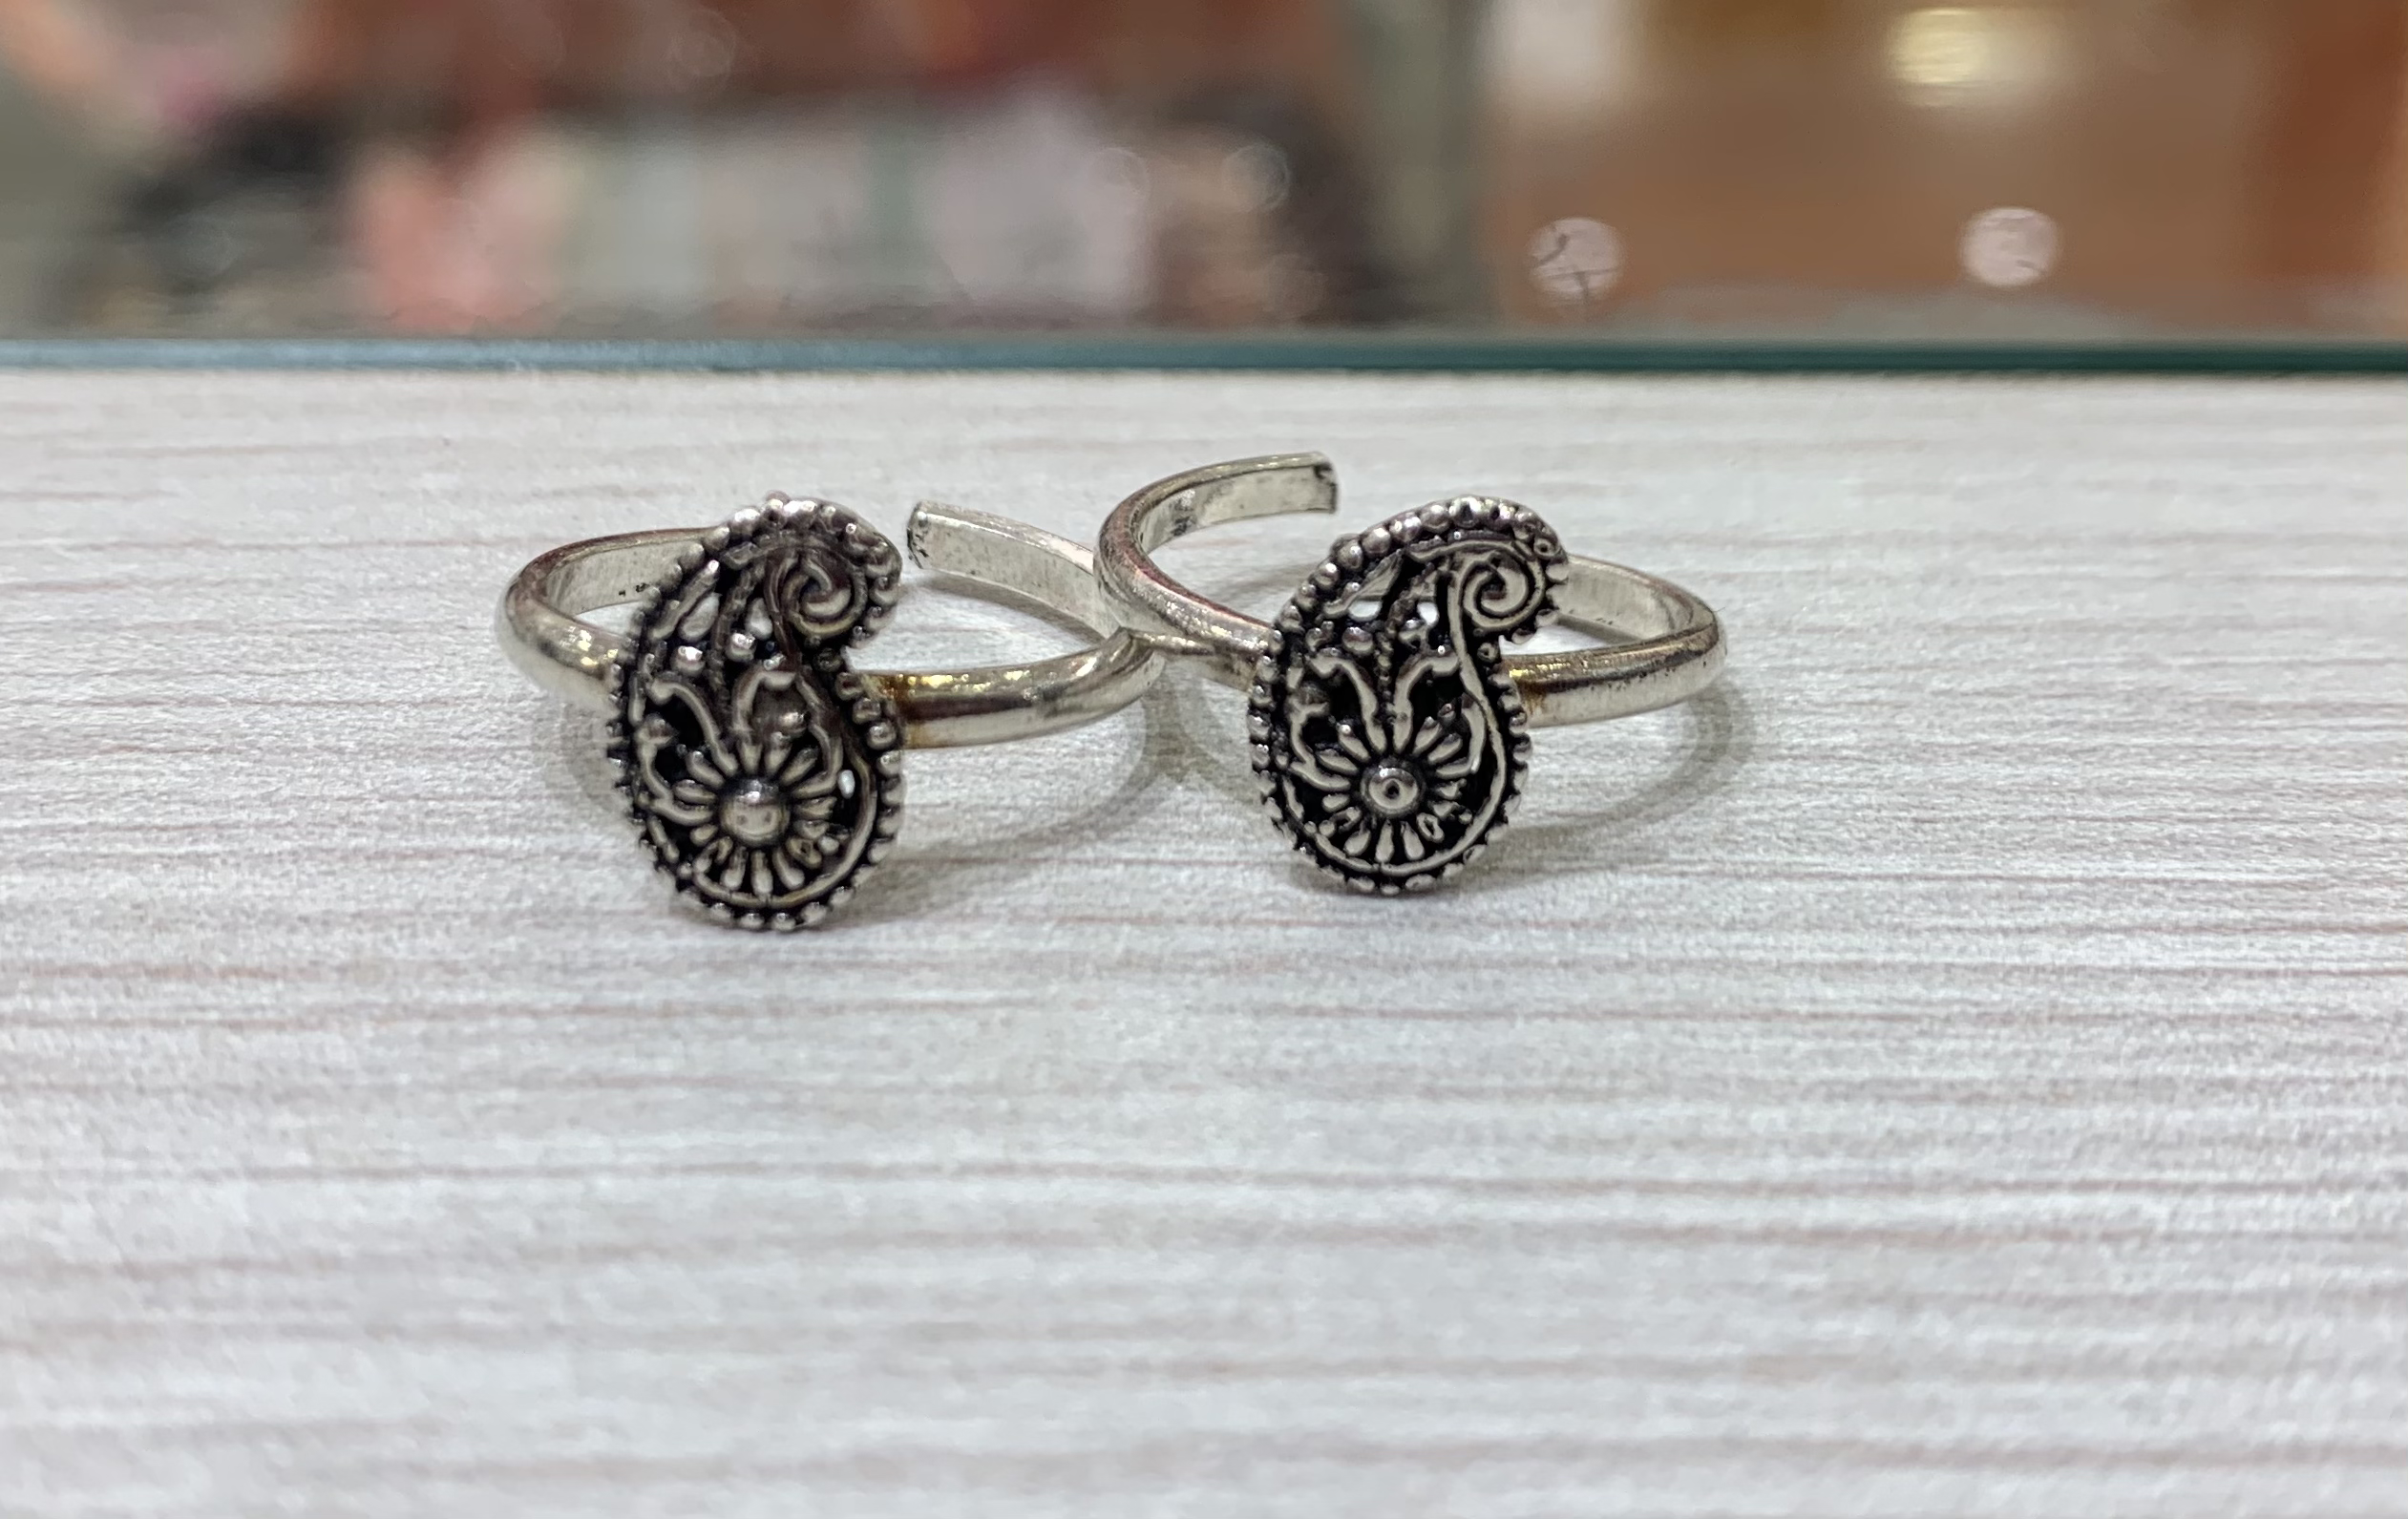 Oxidised Silver Toe Ring in Paisley Design